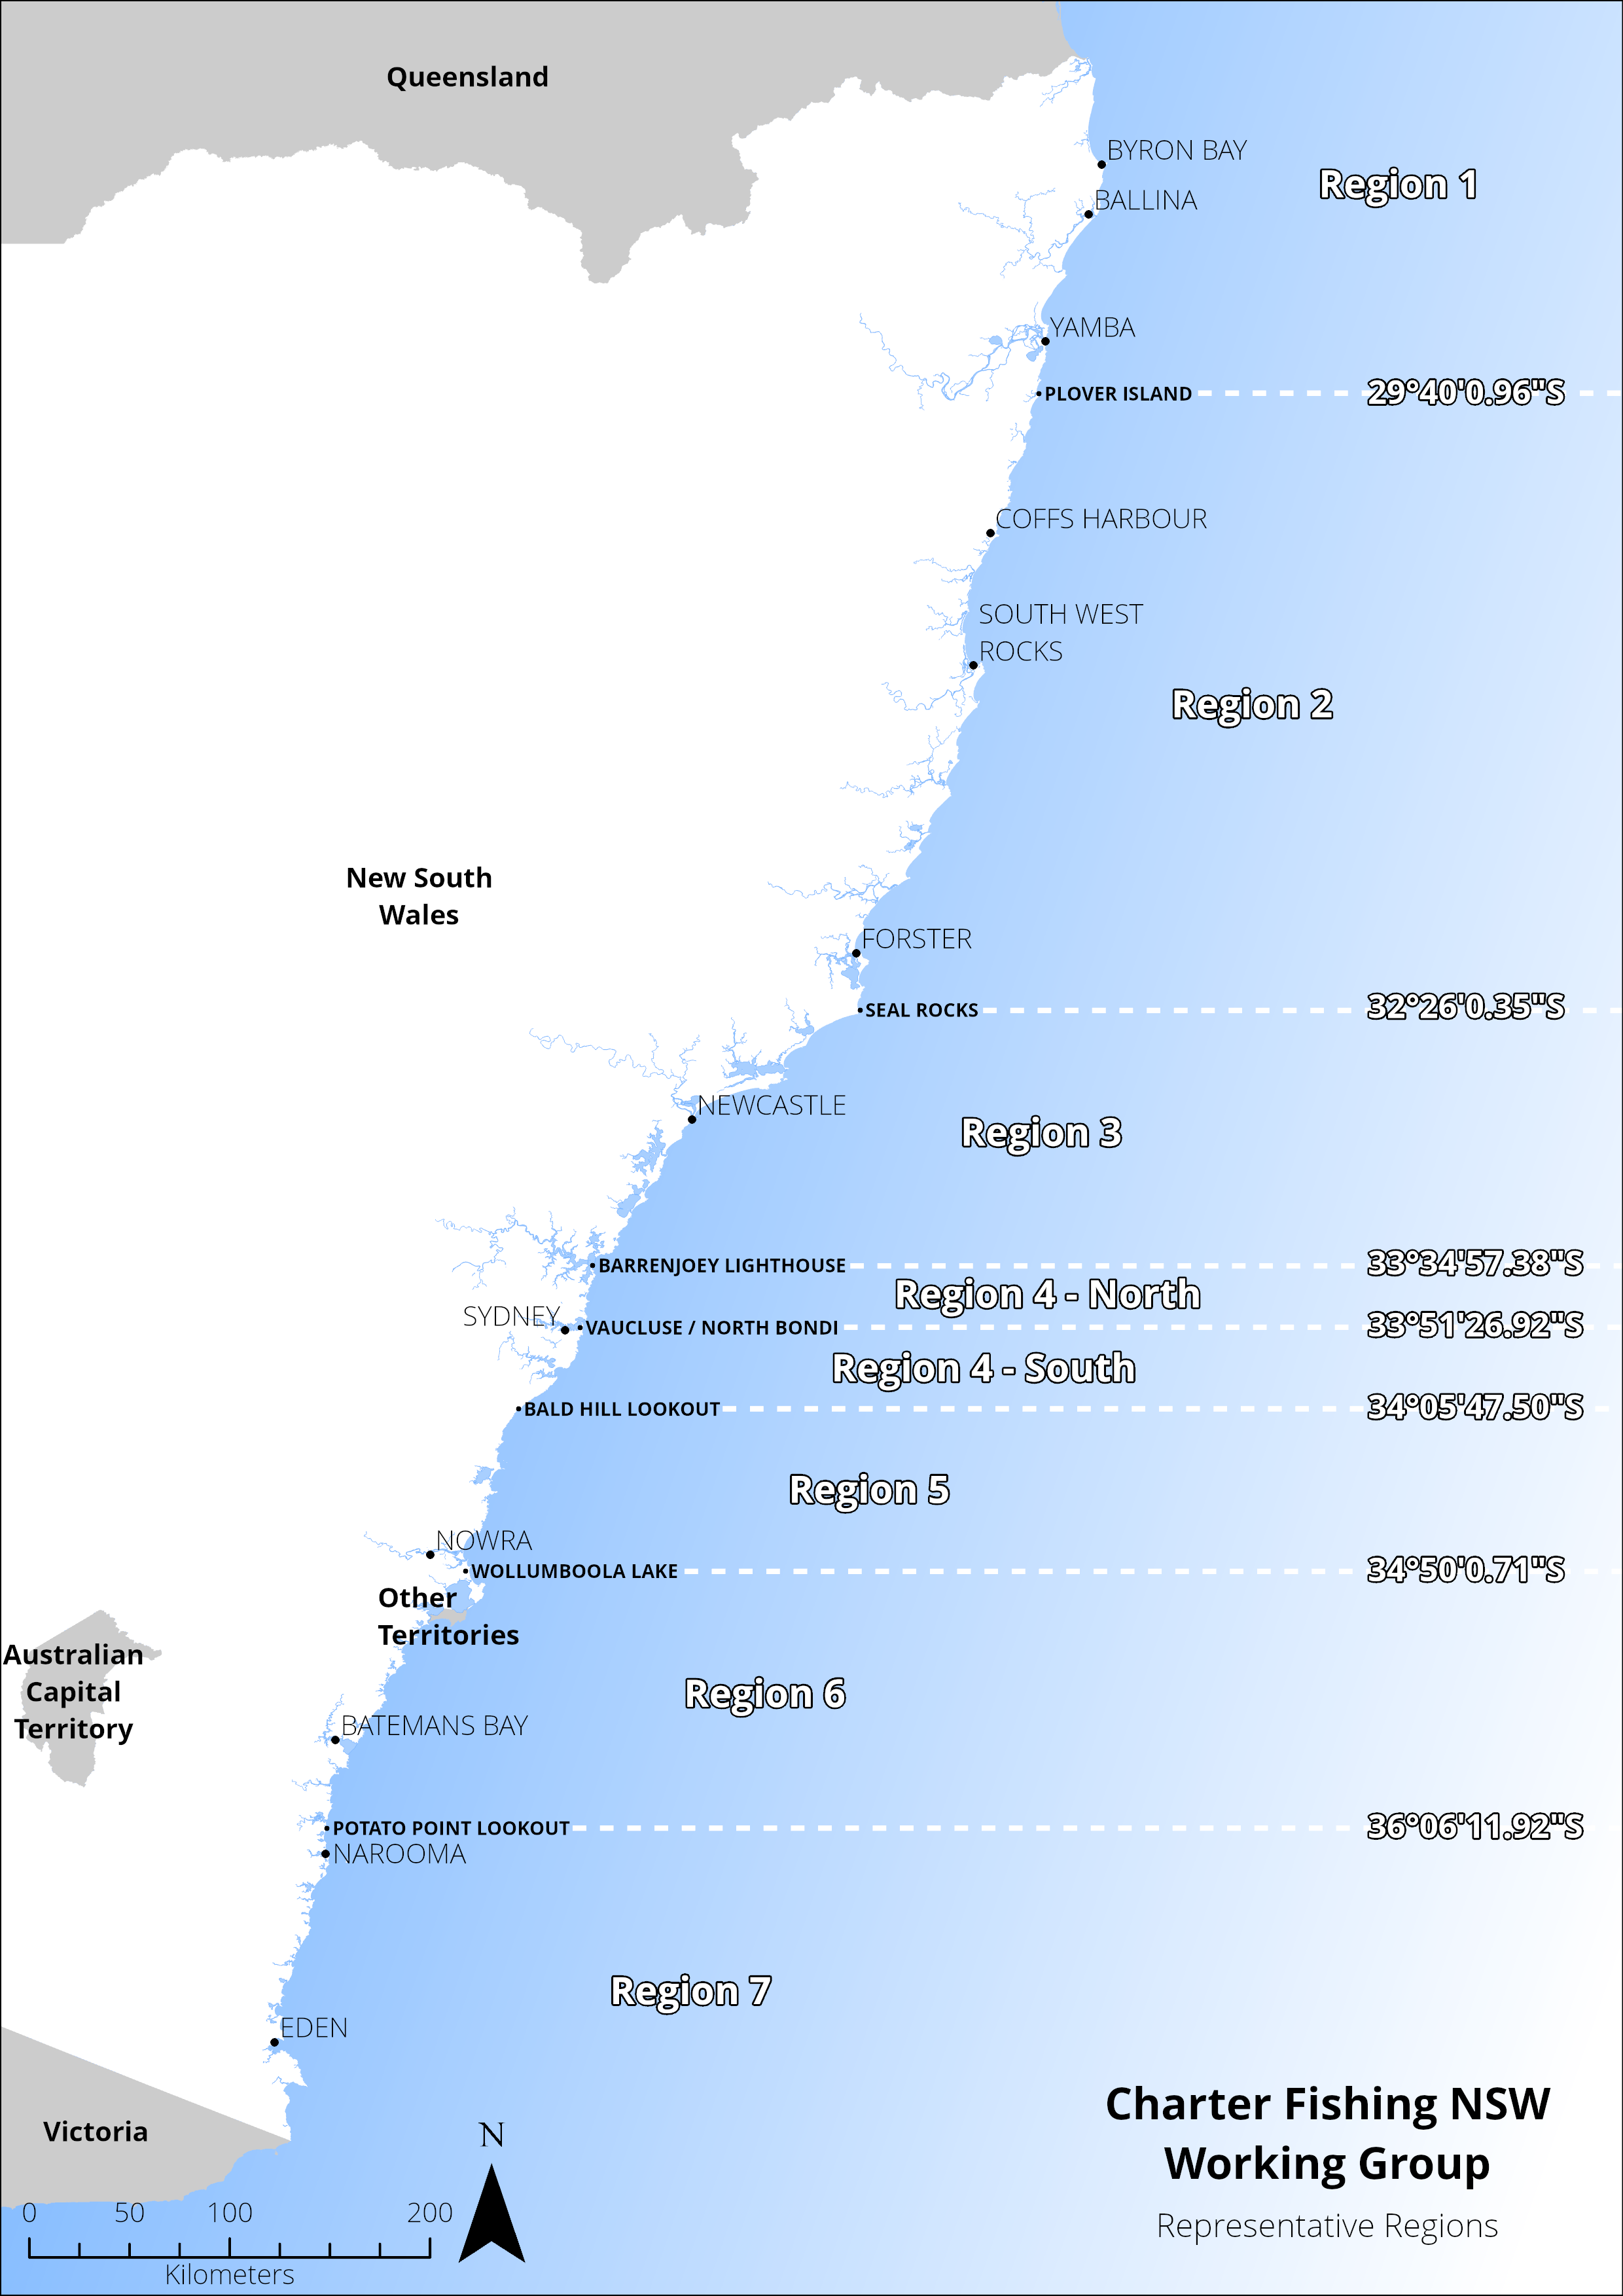 Map of Charter Fishing NSW Working Group Representative Regions